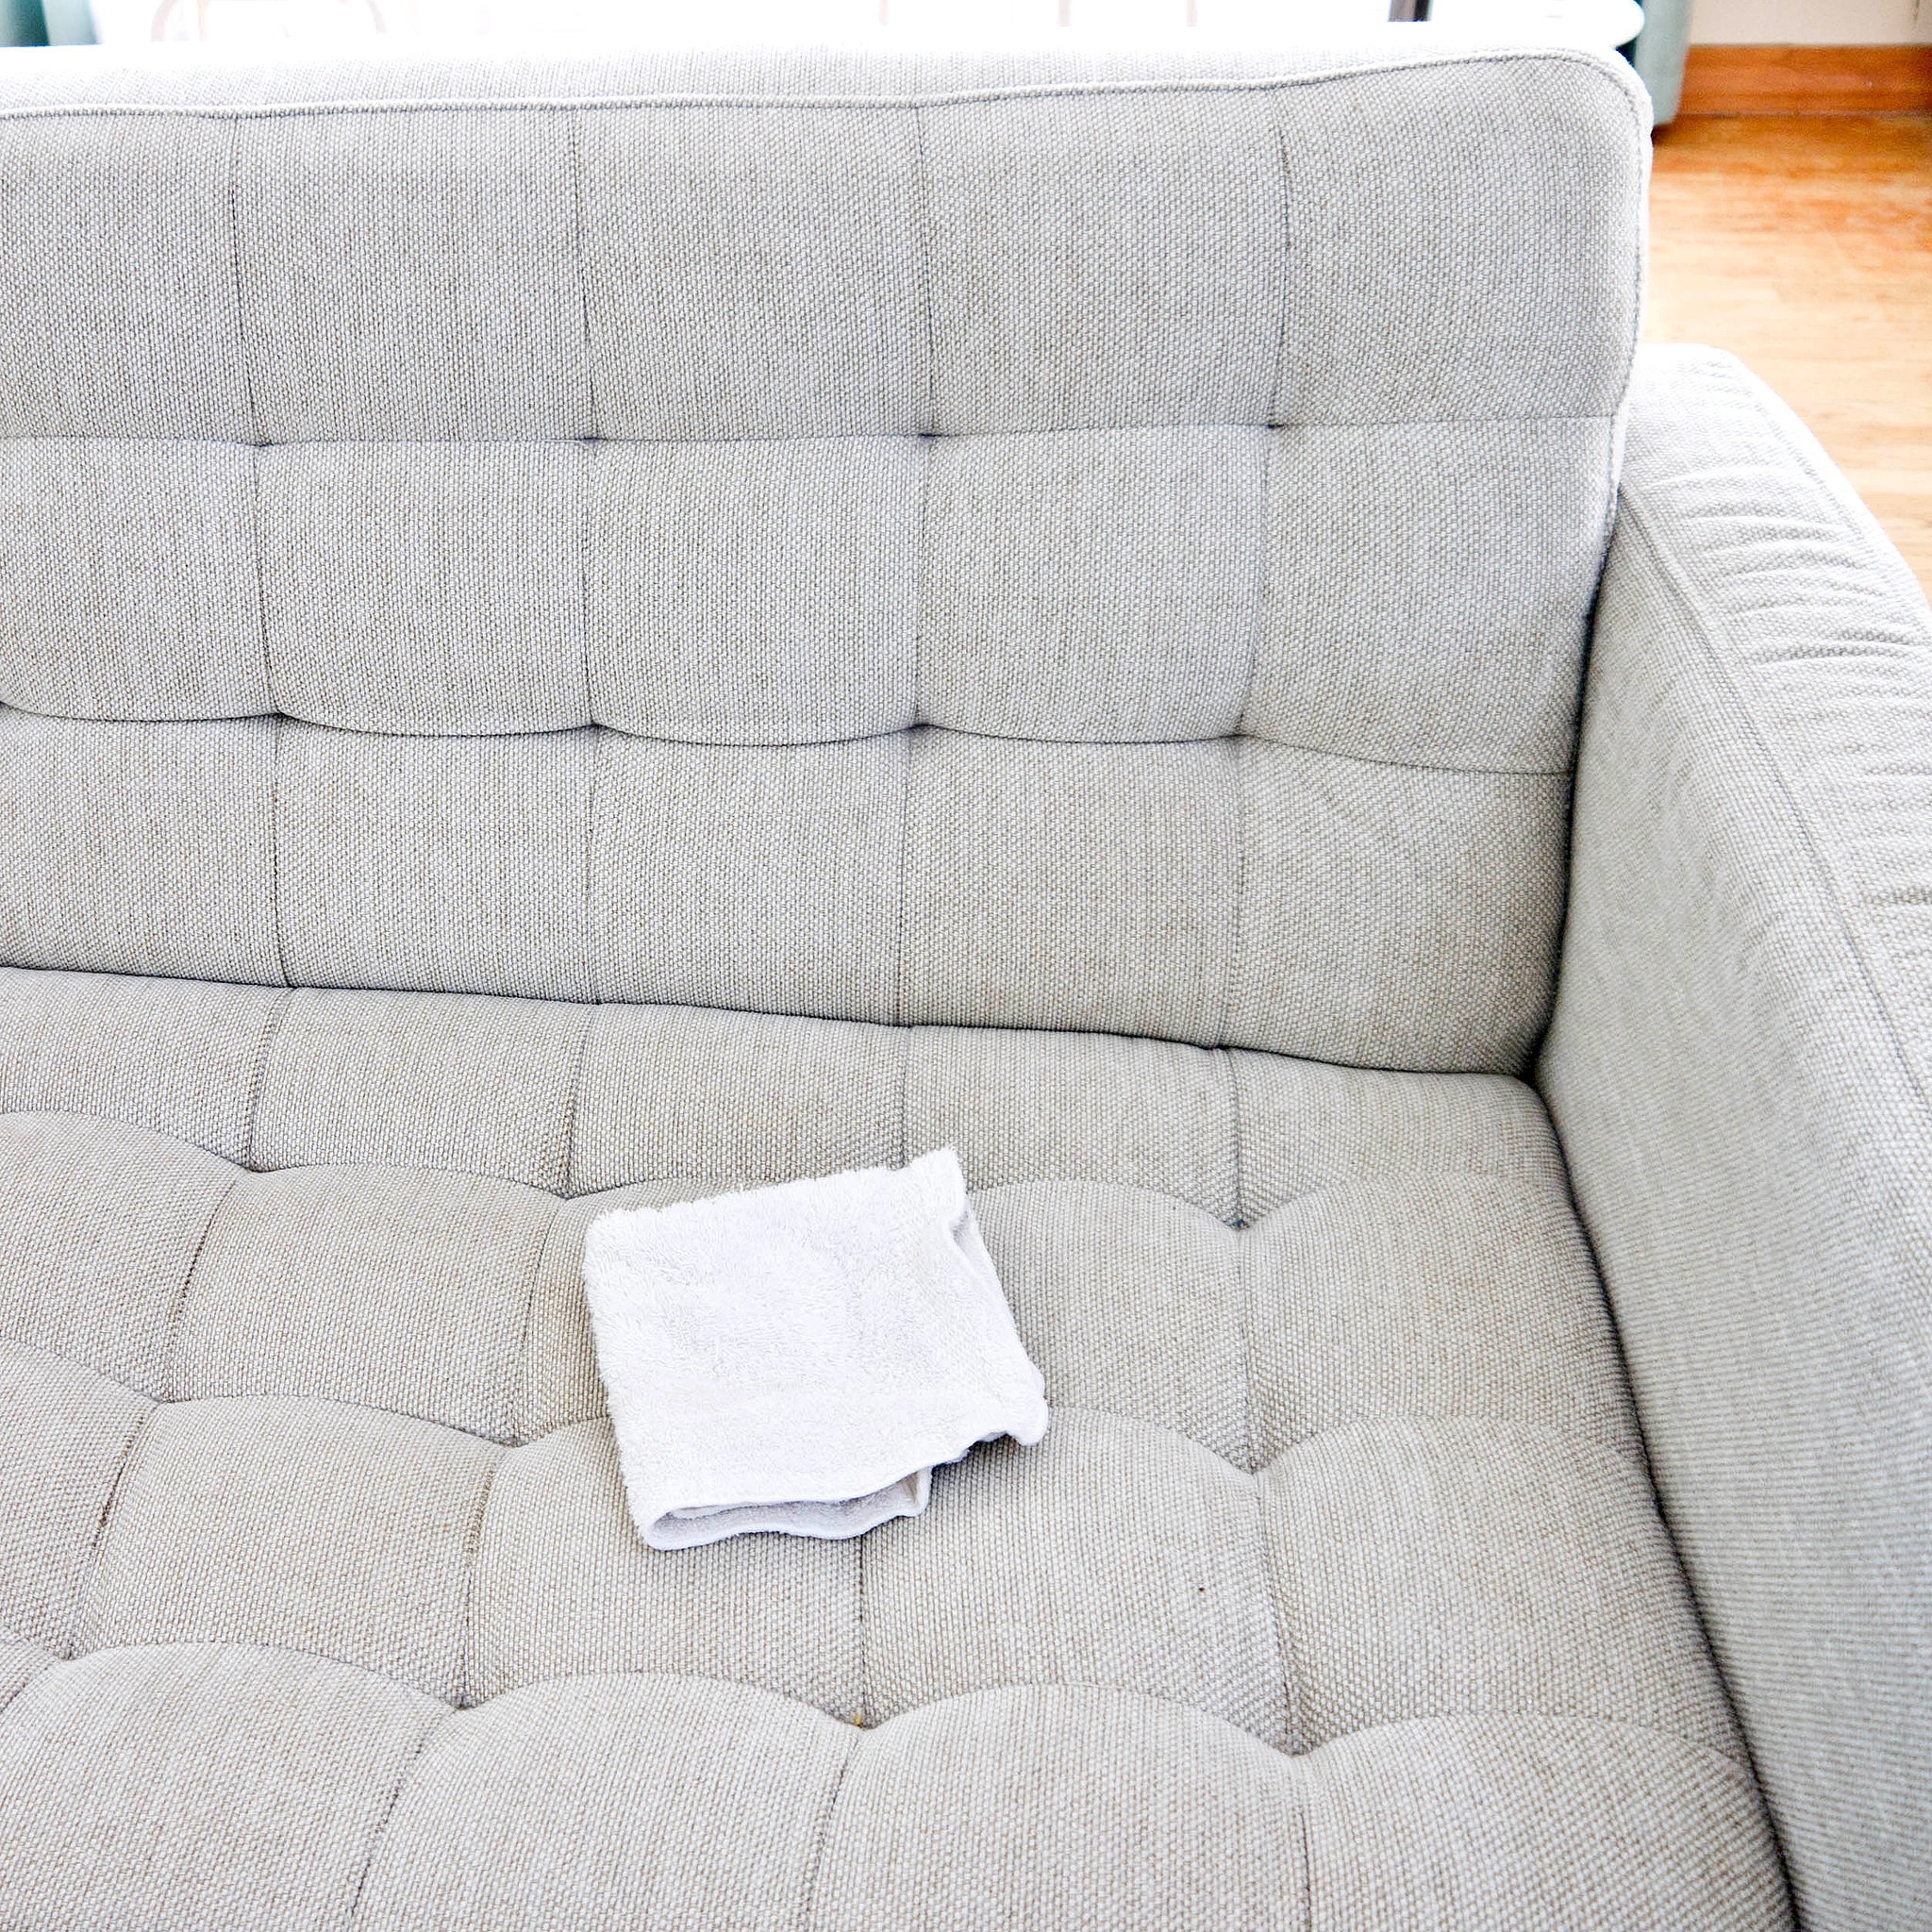 How To Clean A Natural Fabric Couch, How To Clean Sofa With Bicarbonate Soda